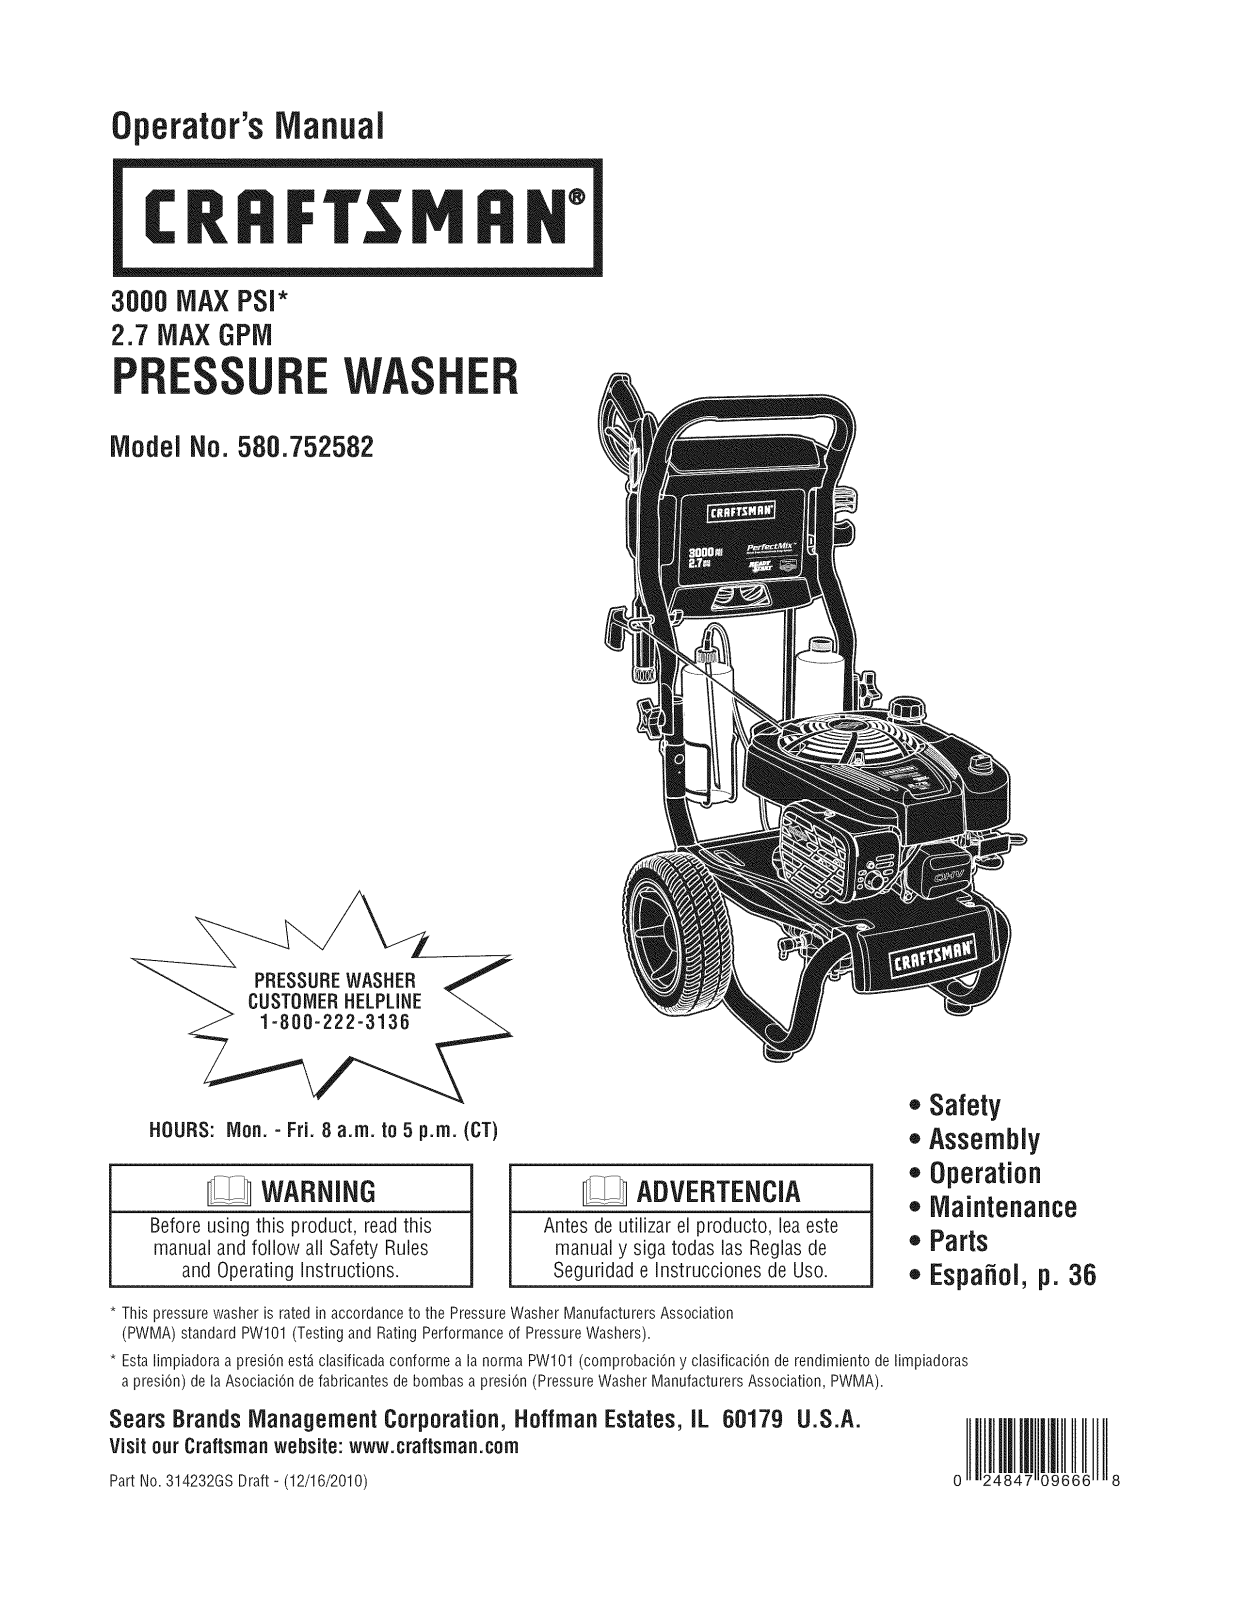 Briggs & Stratton 020436-2, 580752582 Owner’s Manual